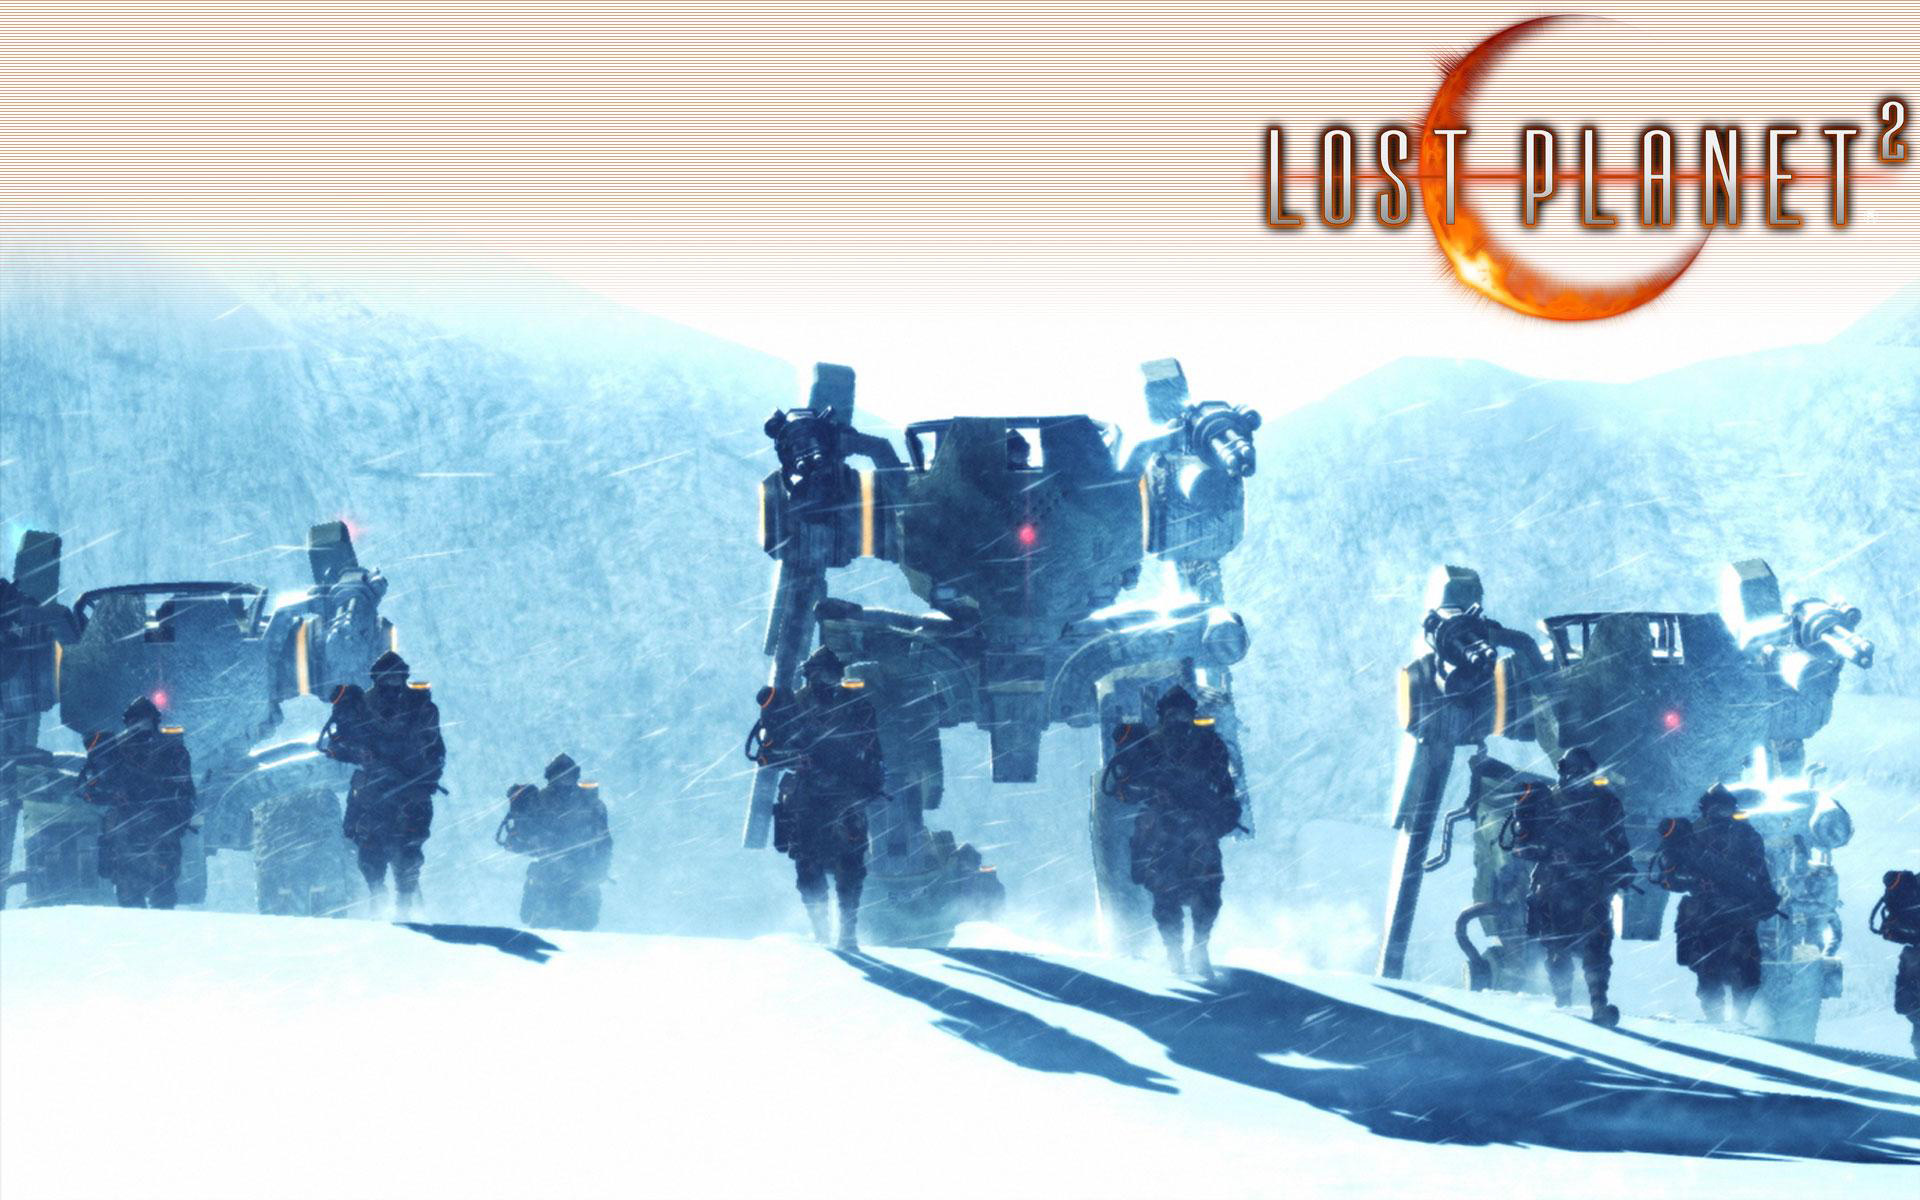 Lost Planet Wallpapers